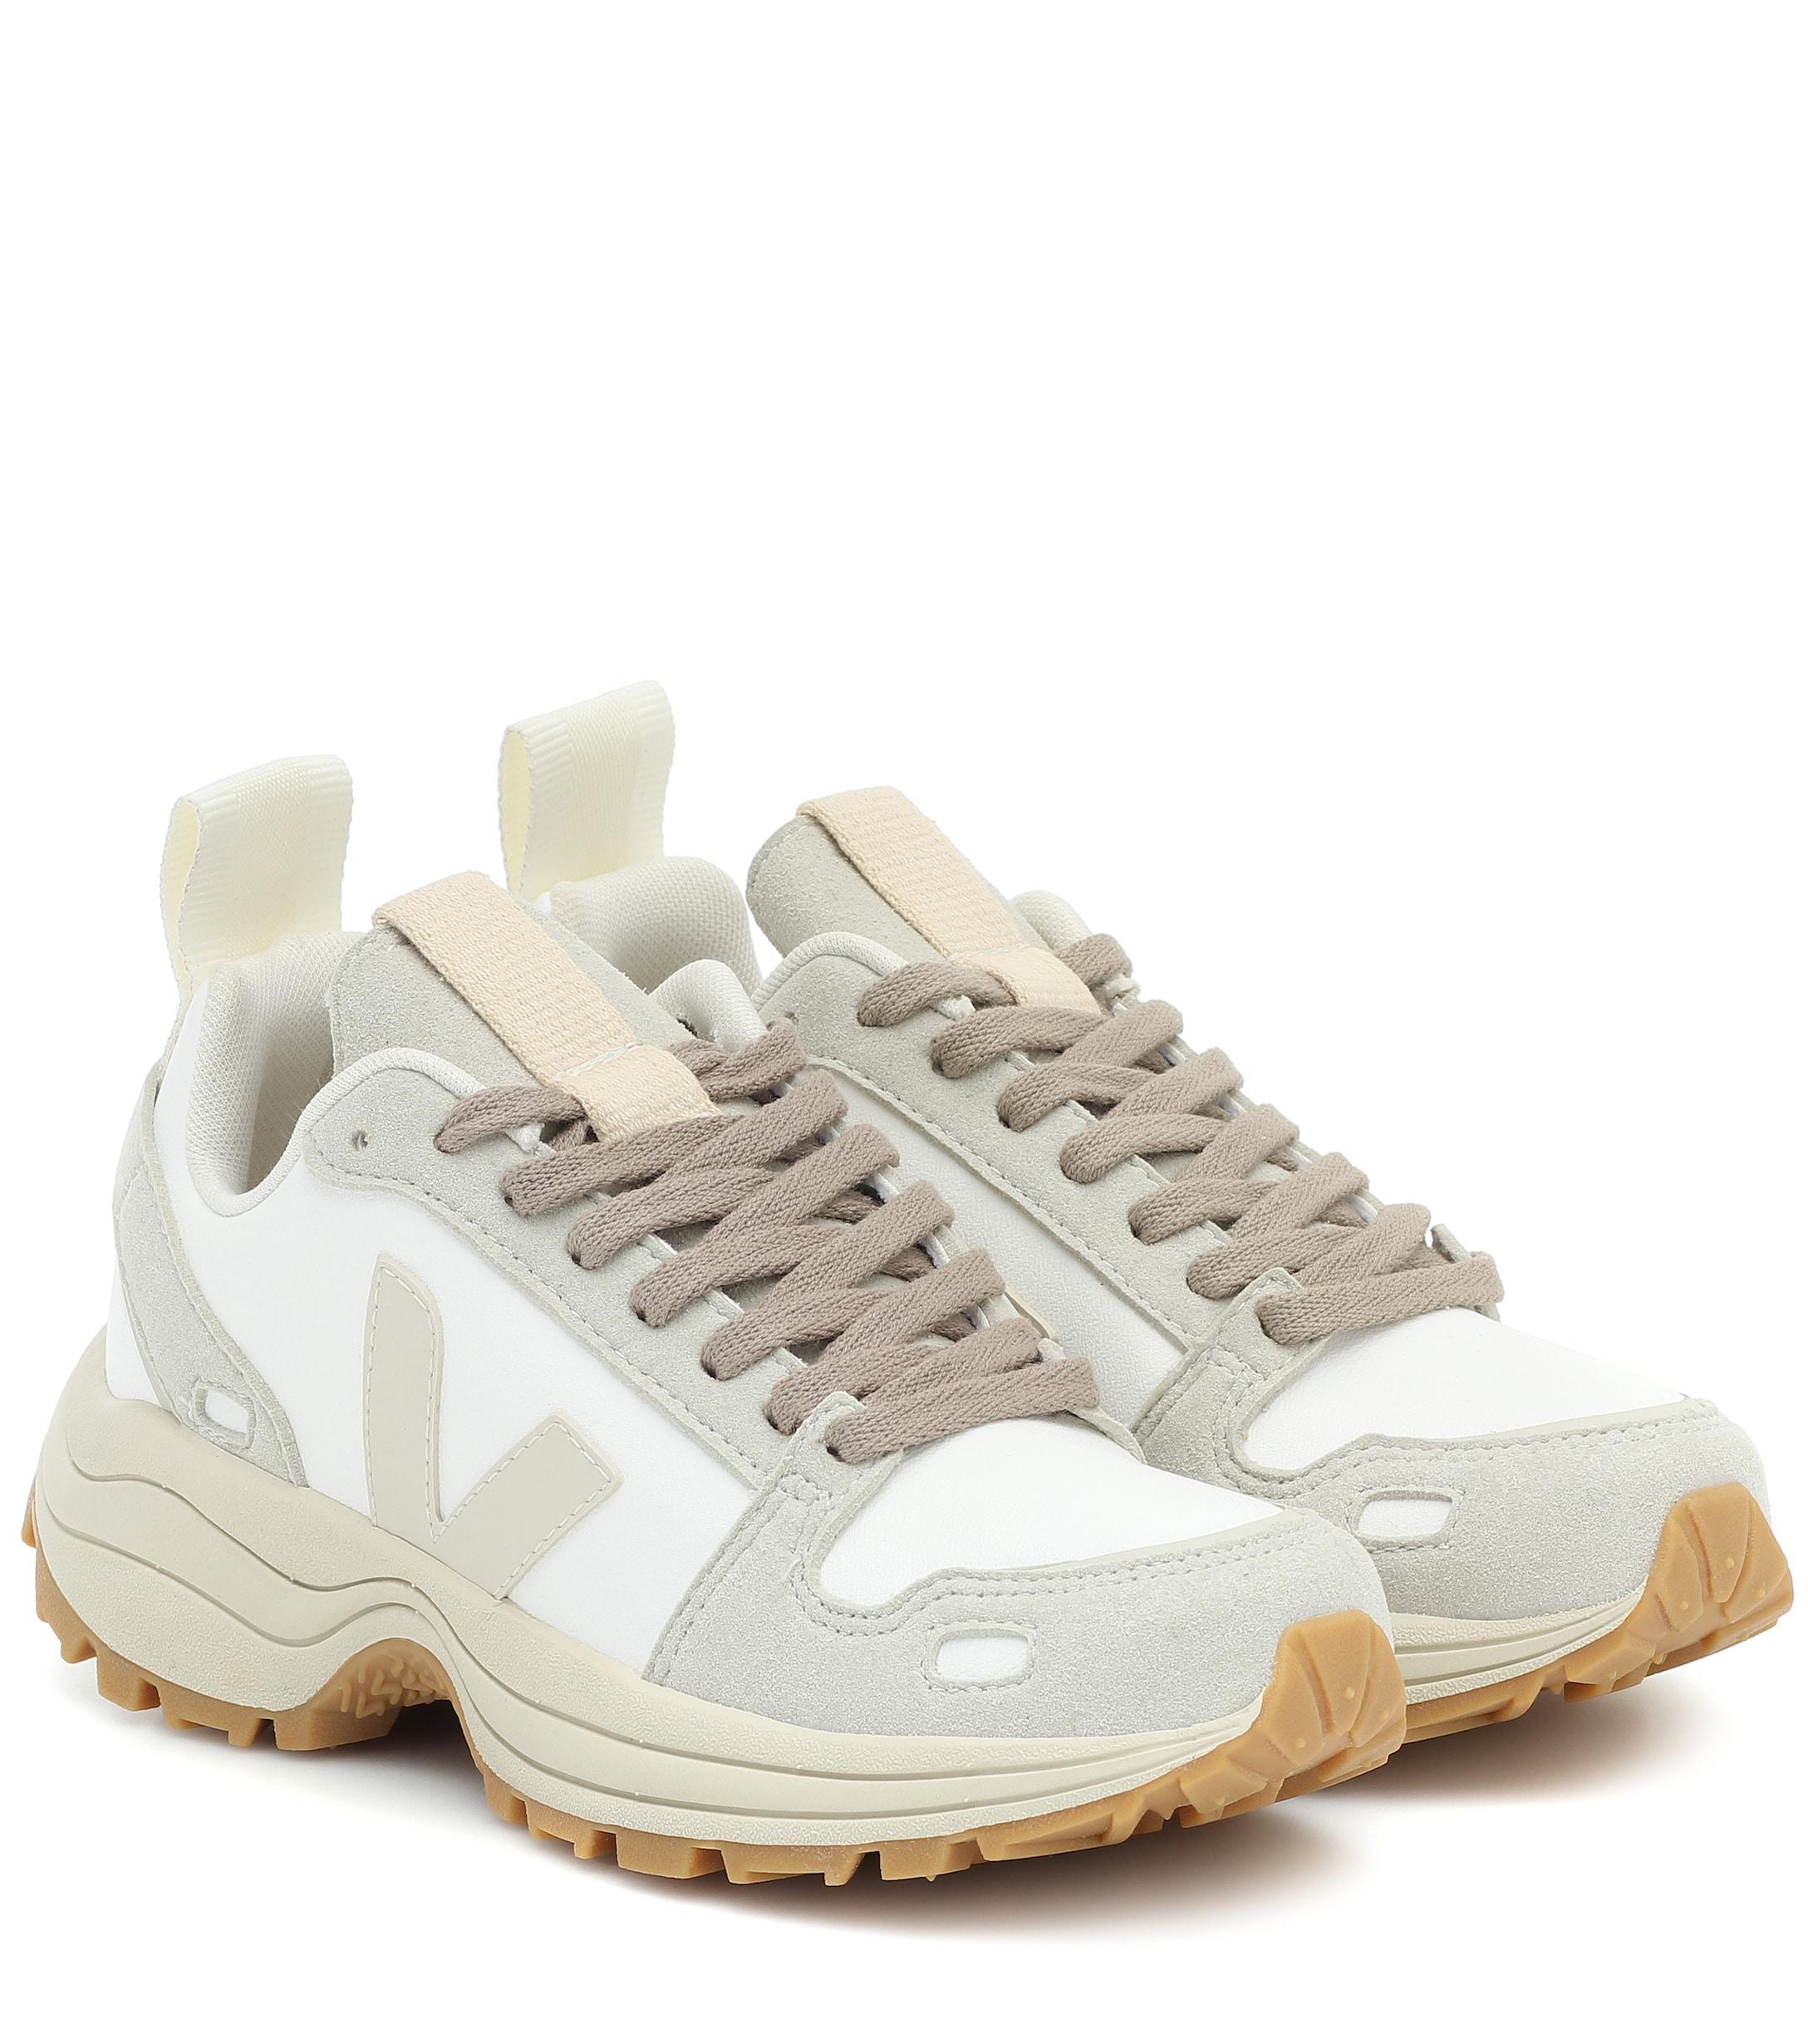 Rick Owens Suede X Veja Faux Leather Sneakers in Pearl (White) - Lyst